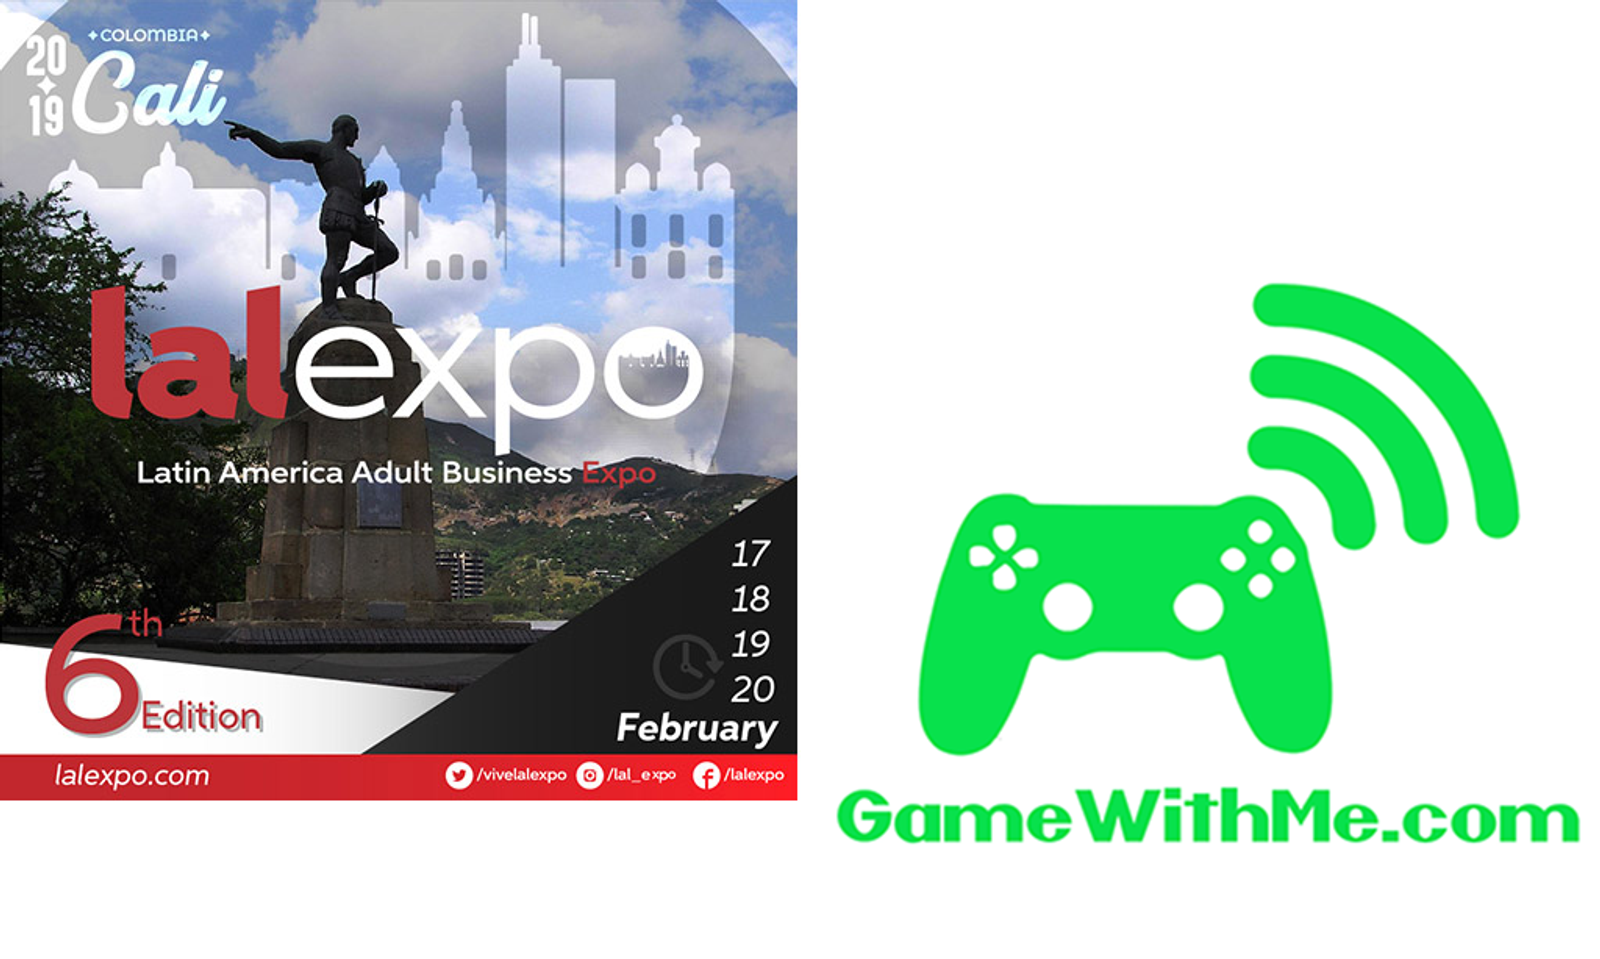 GameWithMe.com to Meet Models, Studios at LAL Expo